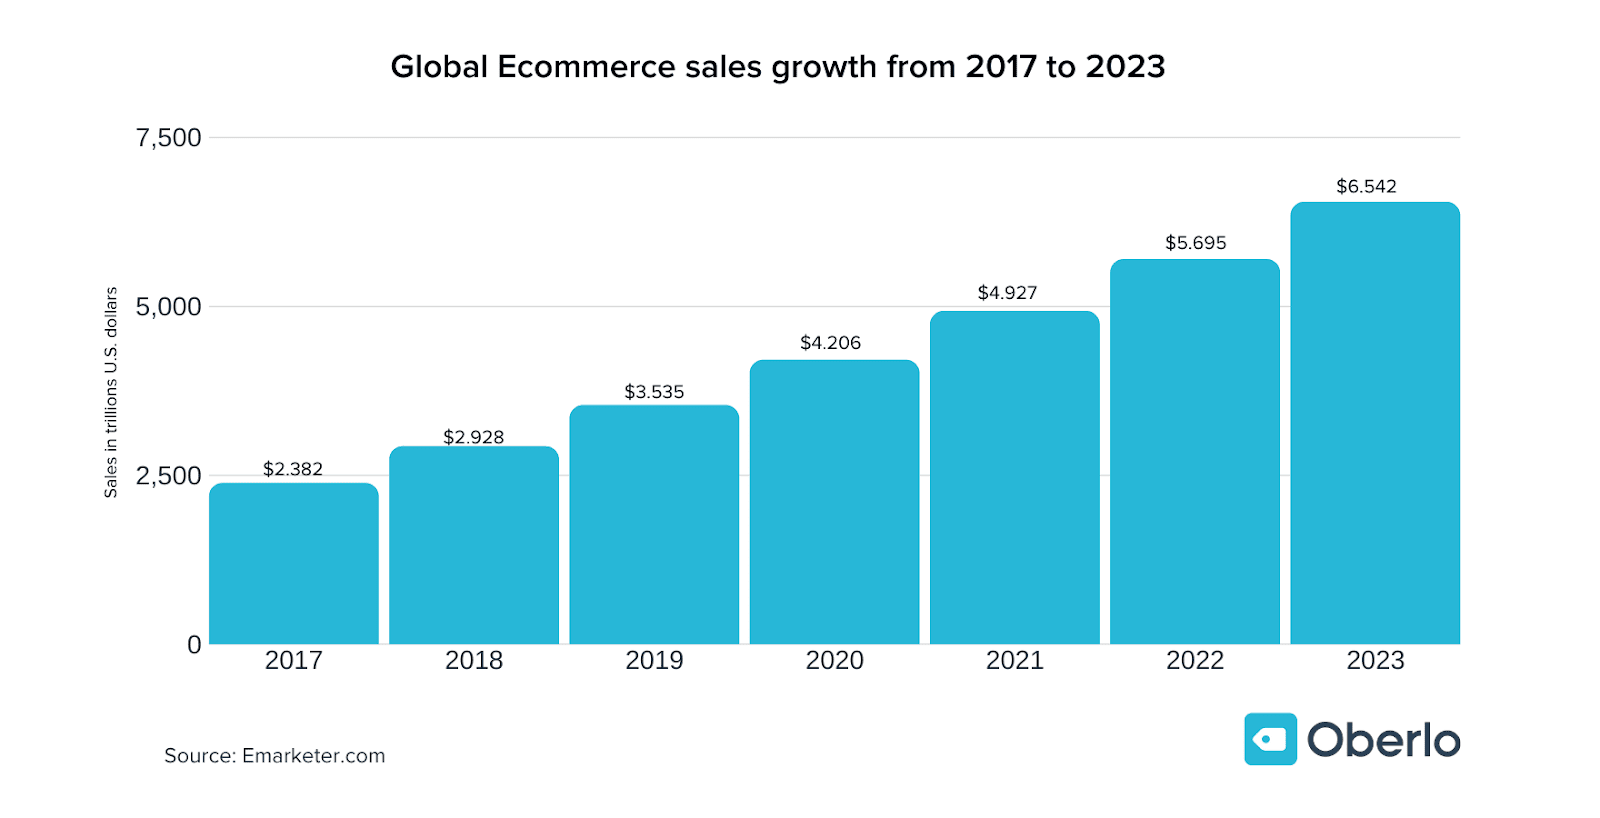 Annual retail e-commerce sales growth worldwide from 2017 to 2023